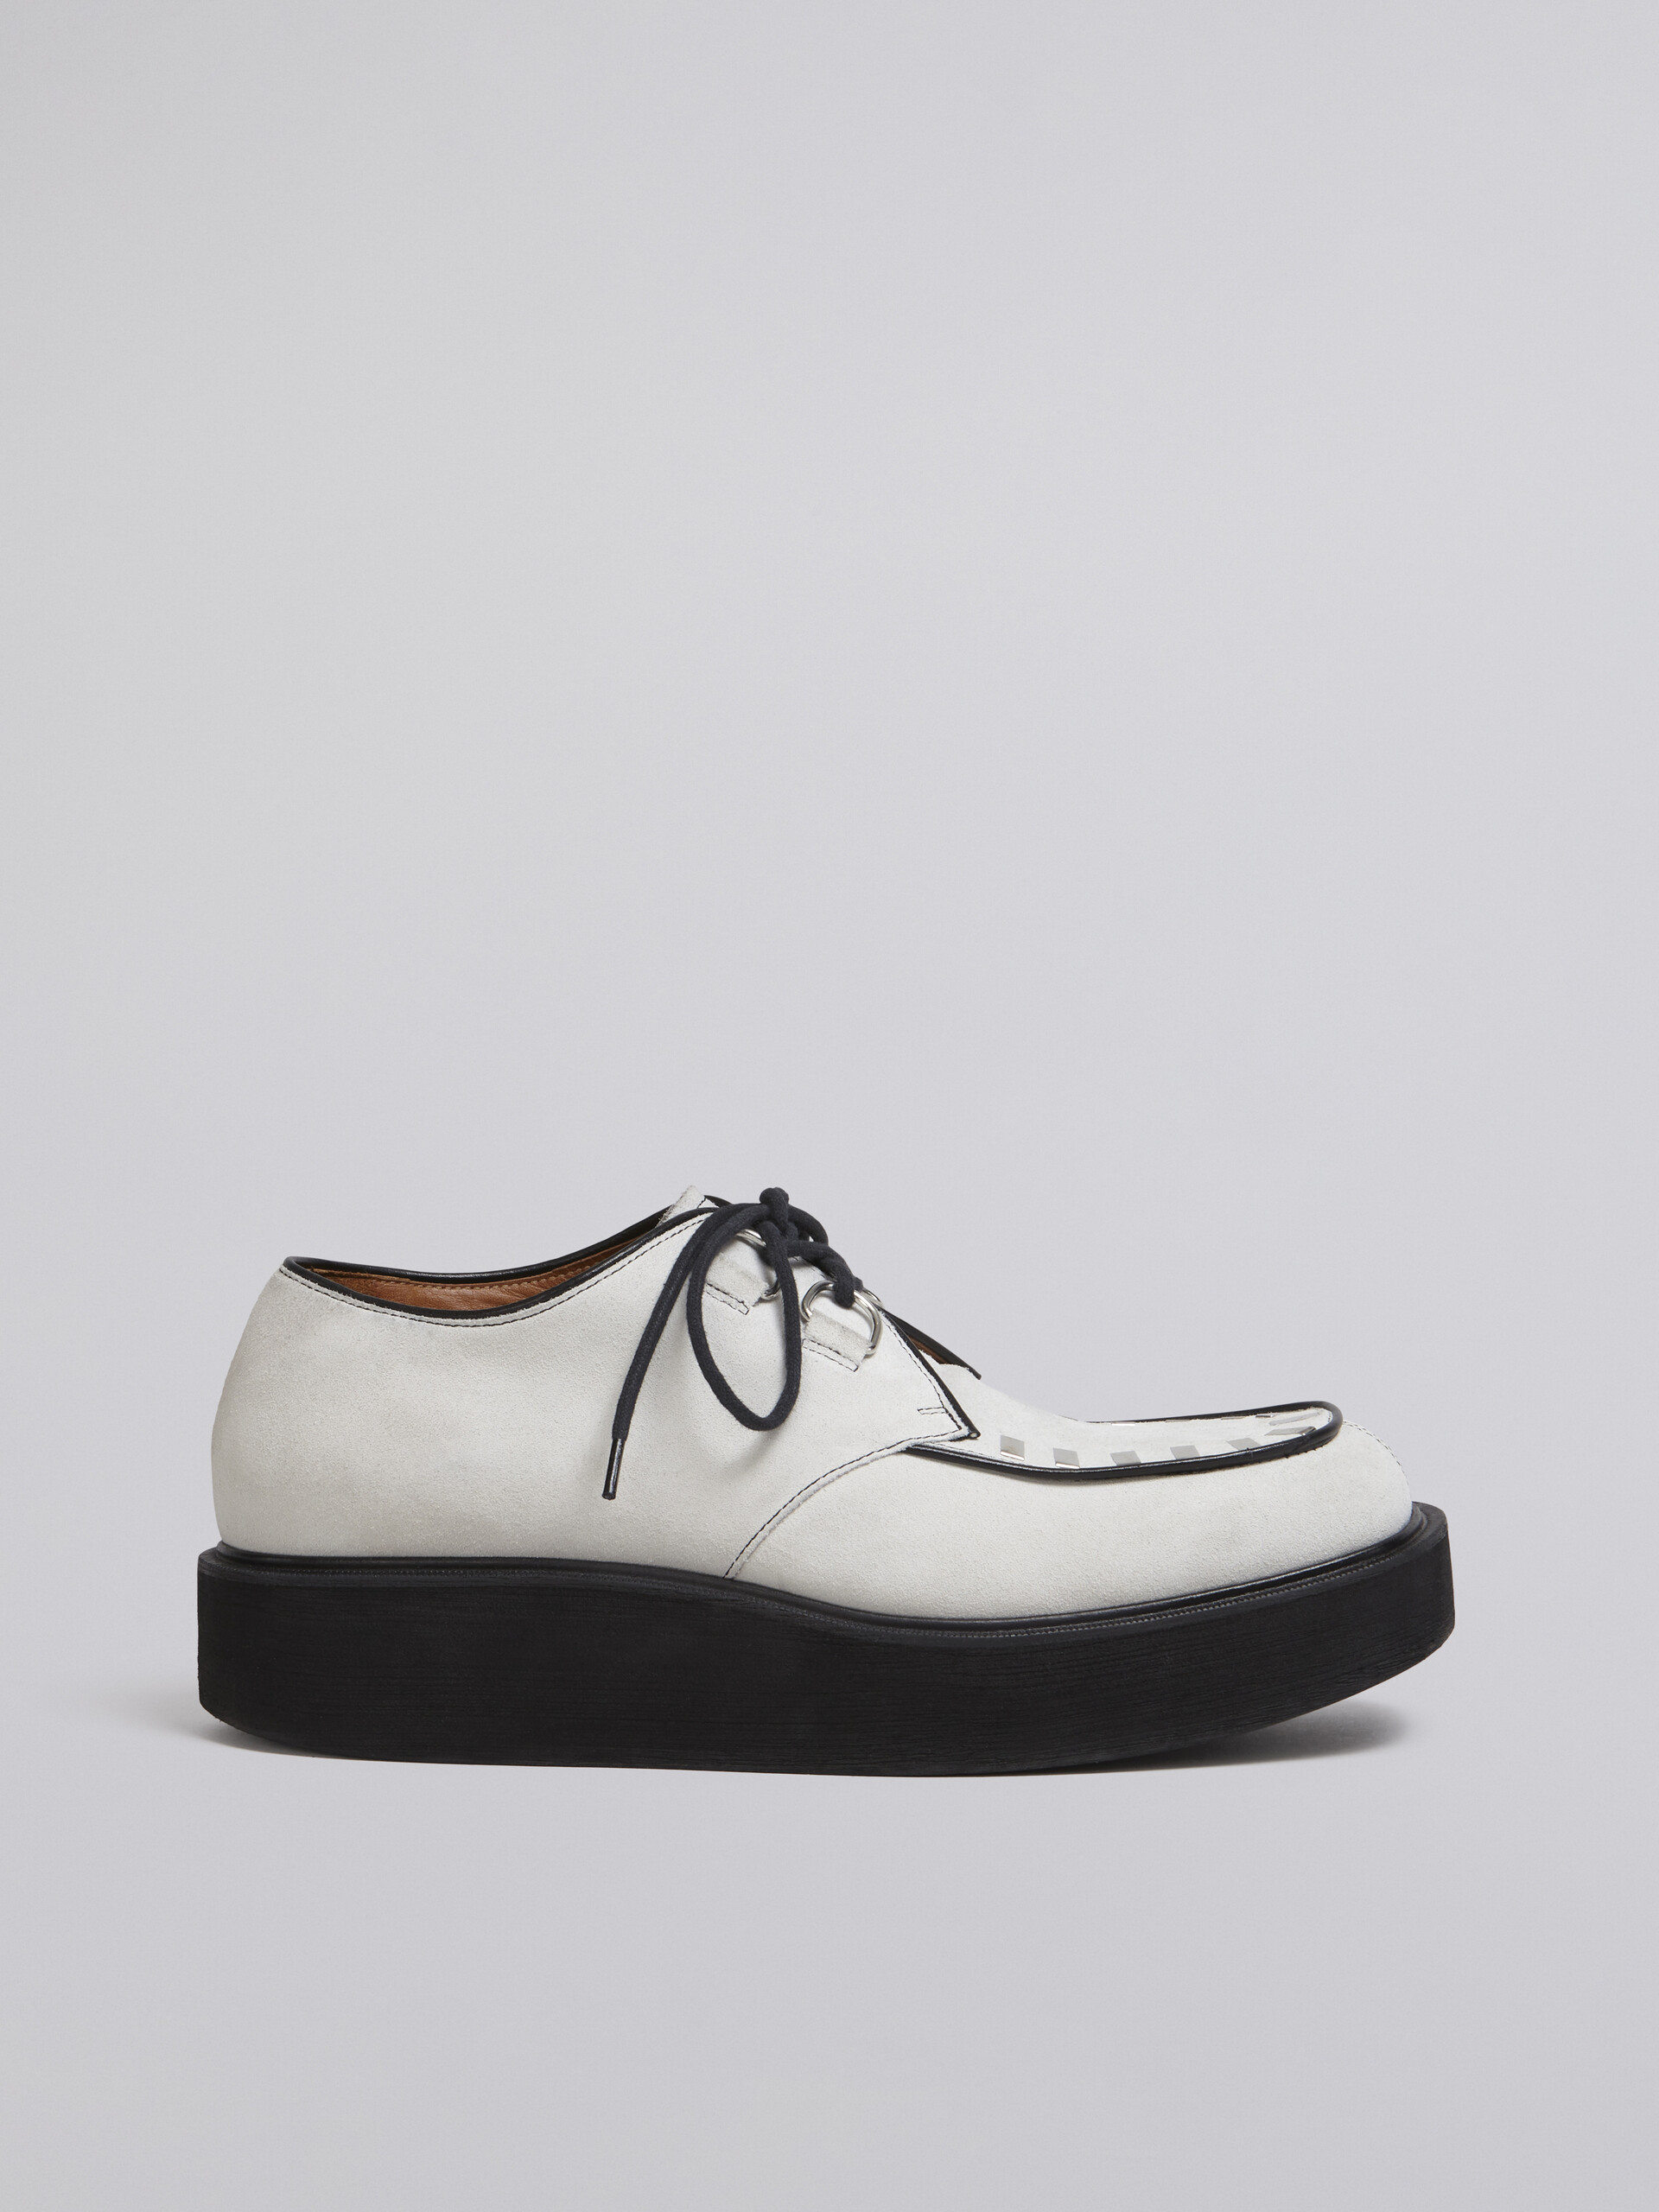 Calfskin lace-up with square toe - Lace-ups - Image 1